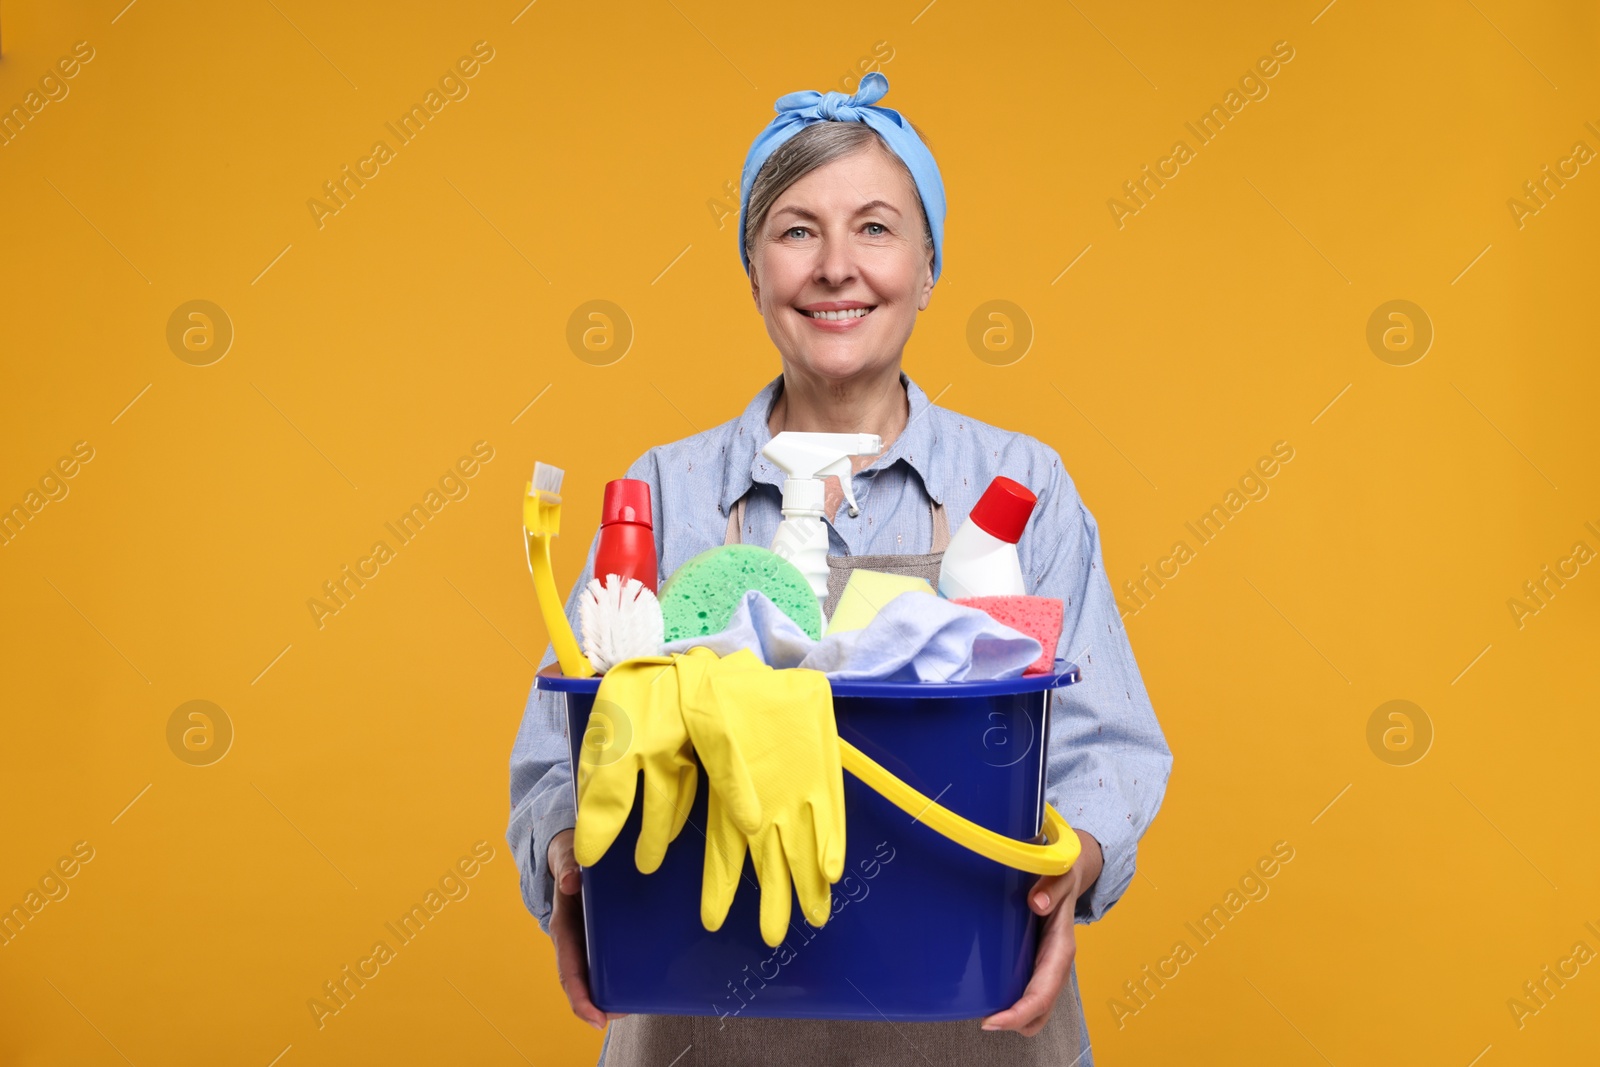 Photo of Happy housewife holding bucket with cleaning supplies on orange background